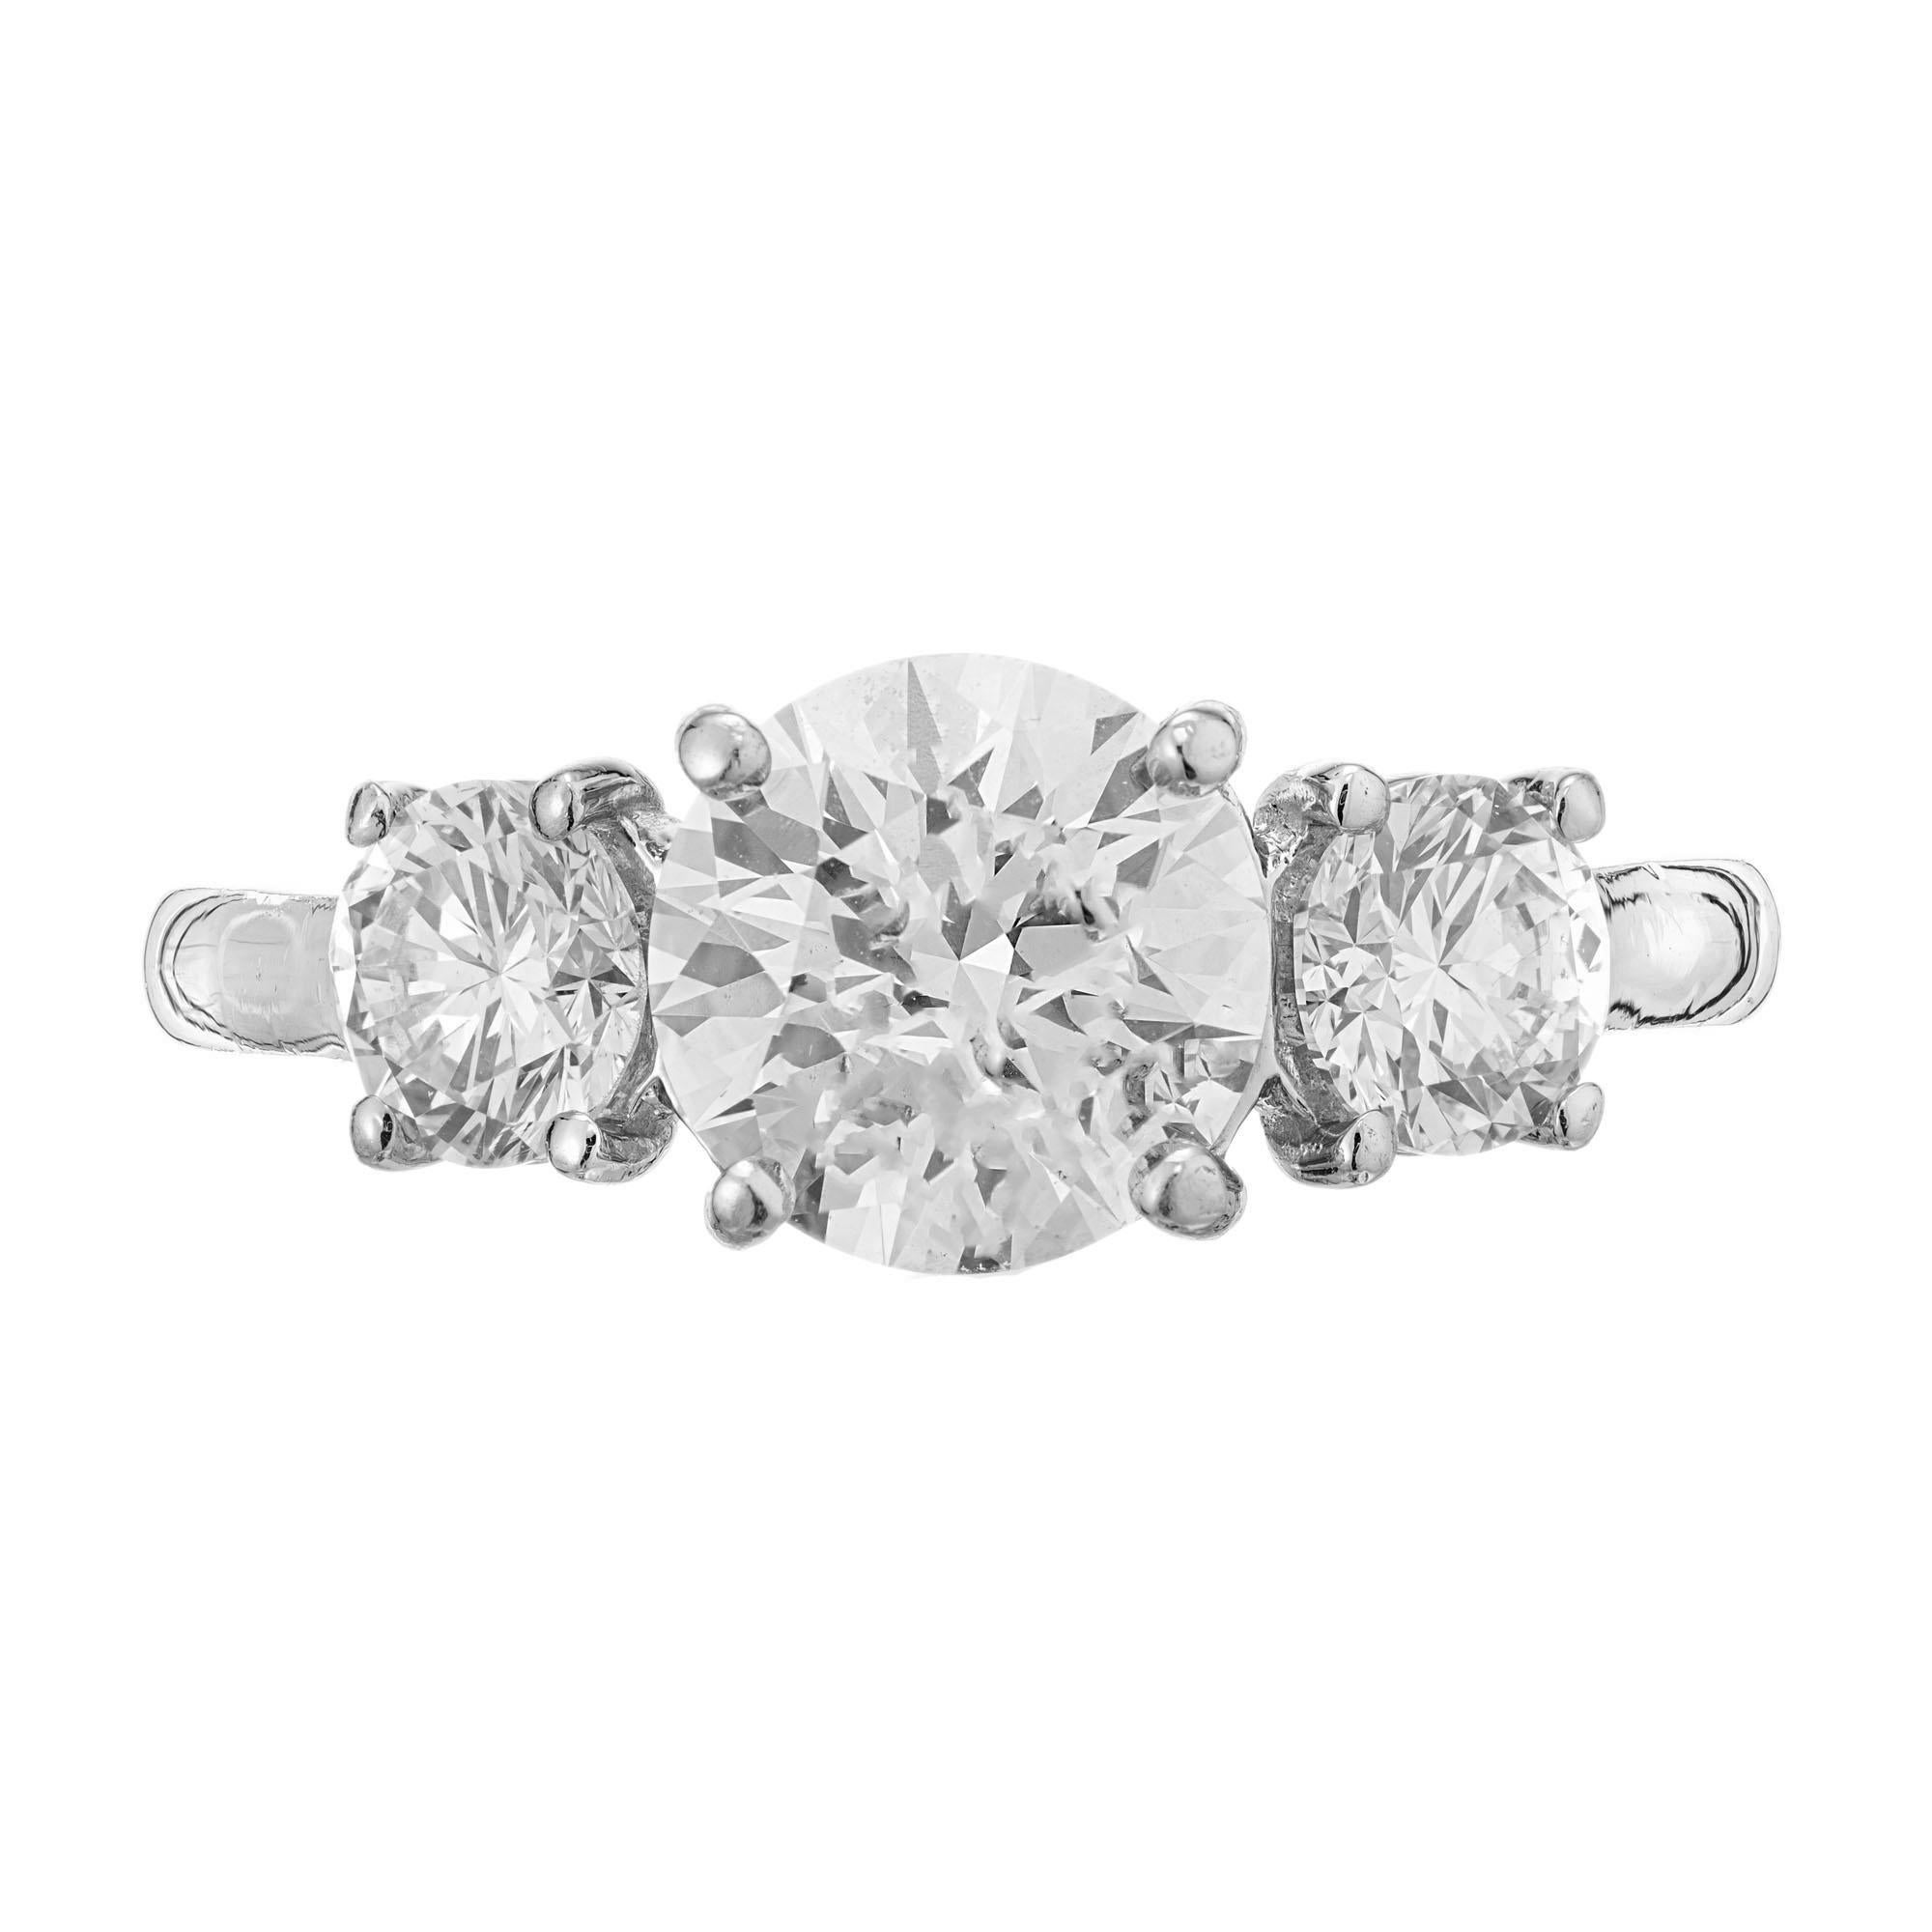 Martin Flyer handmade Diamond engagement Platinum ring. GIA certified round ideal brilliant cut center stone with 2, round ideal brillaint cut side stones in a three-stone platinum setting. 

One diamond approx. total weight 1.52cts, round Ideal